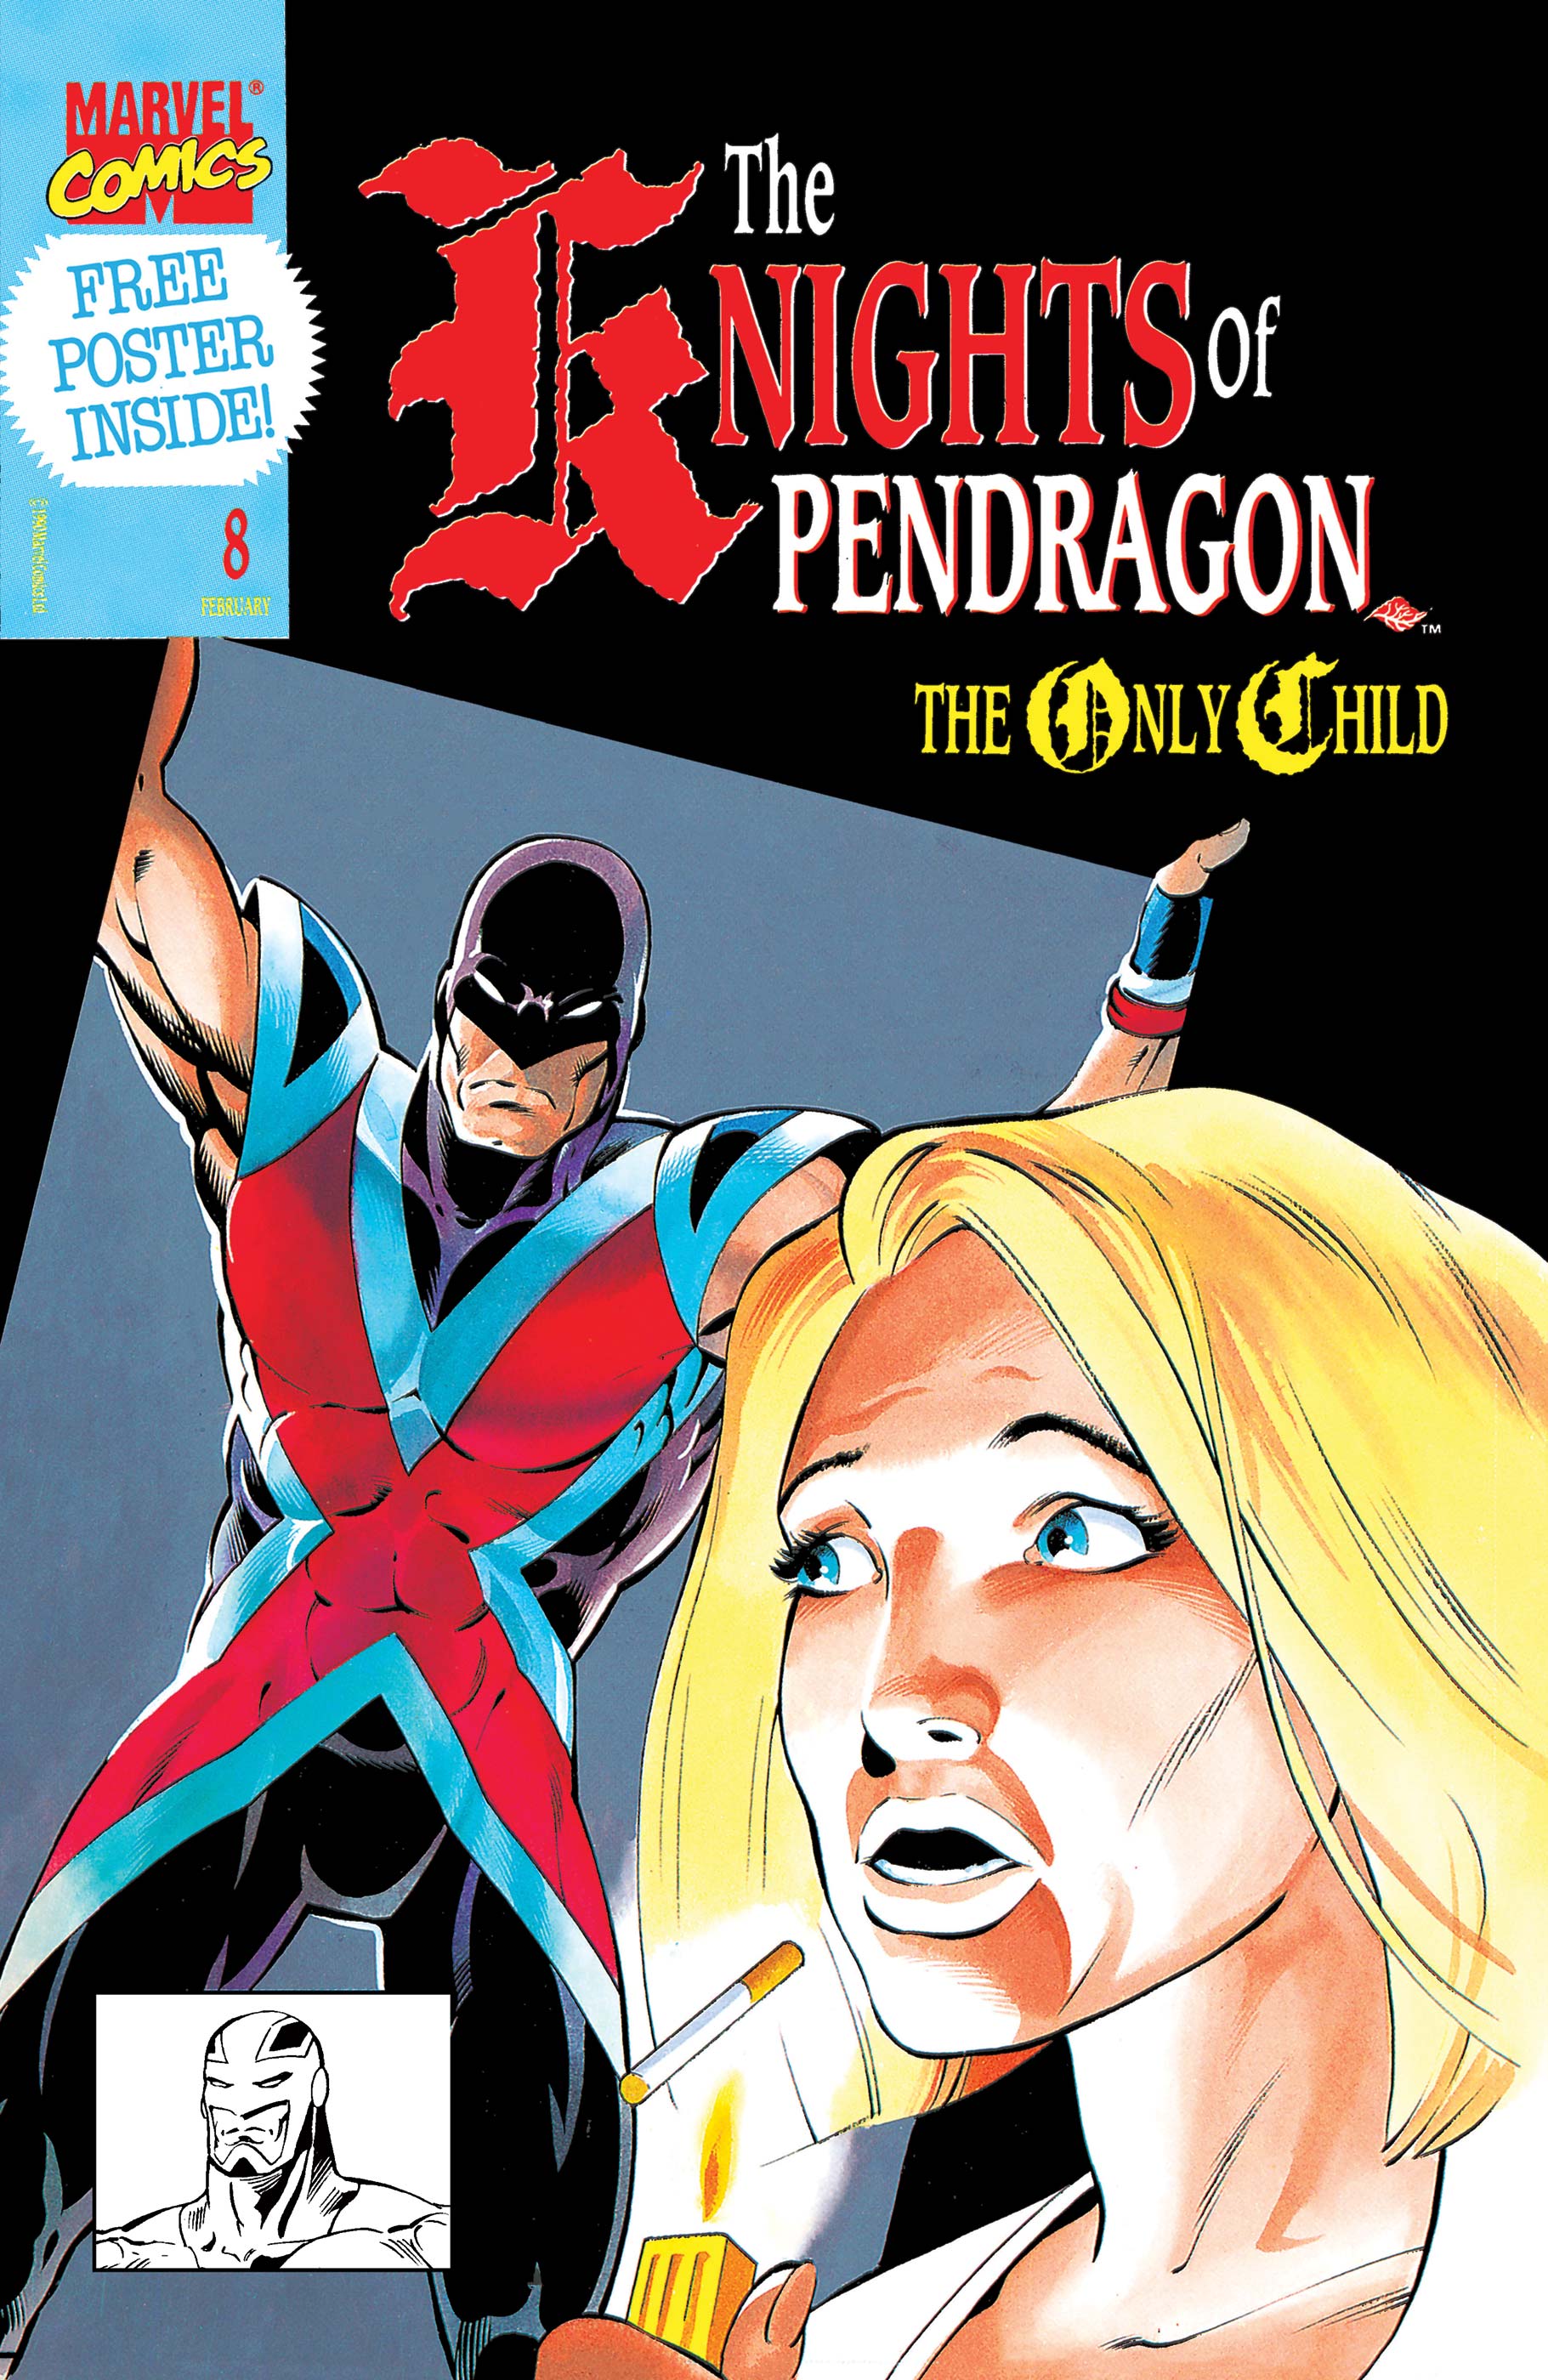 Knights of Pendragon (1990) #8